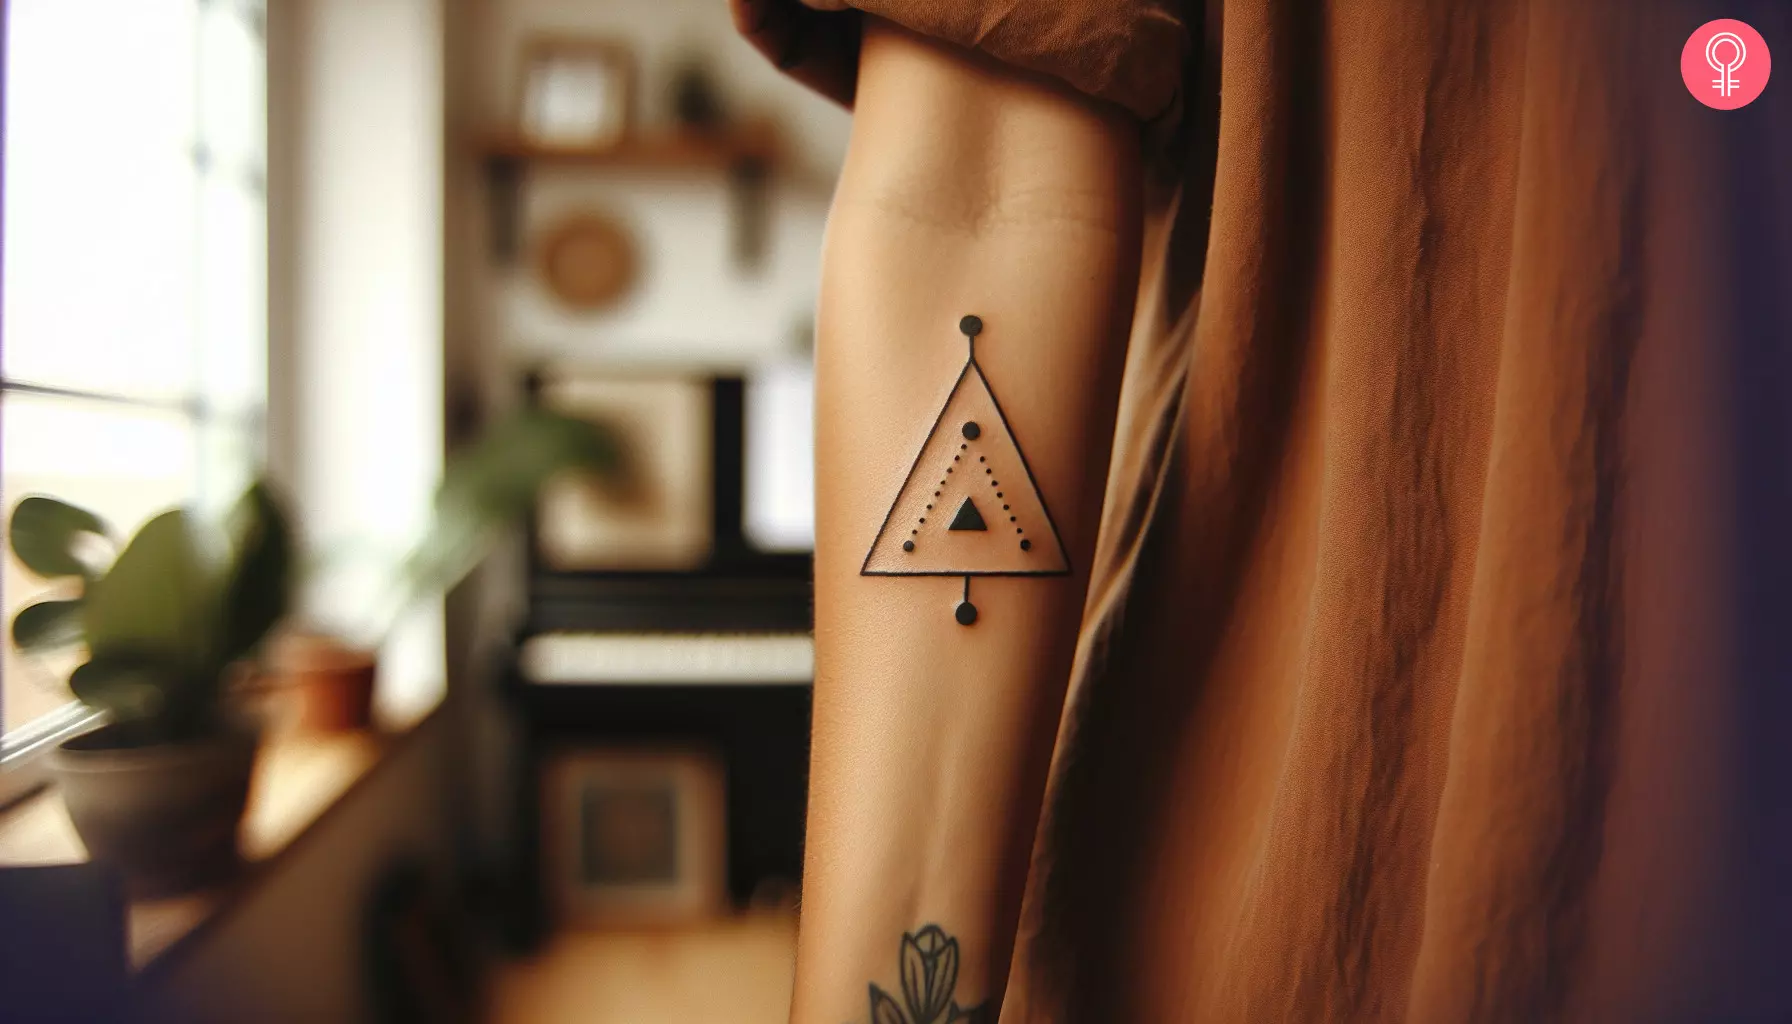 A woman with a triangle tattoo on her forearm